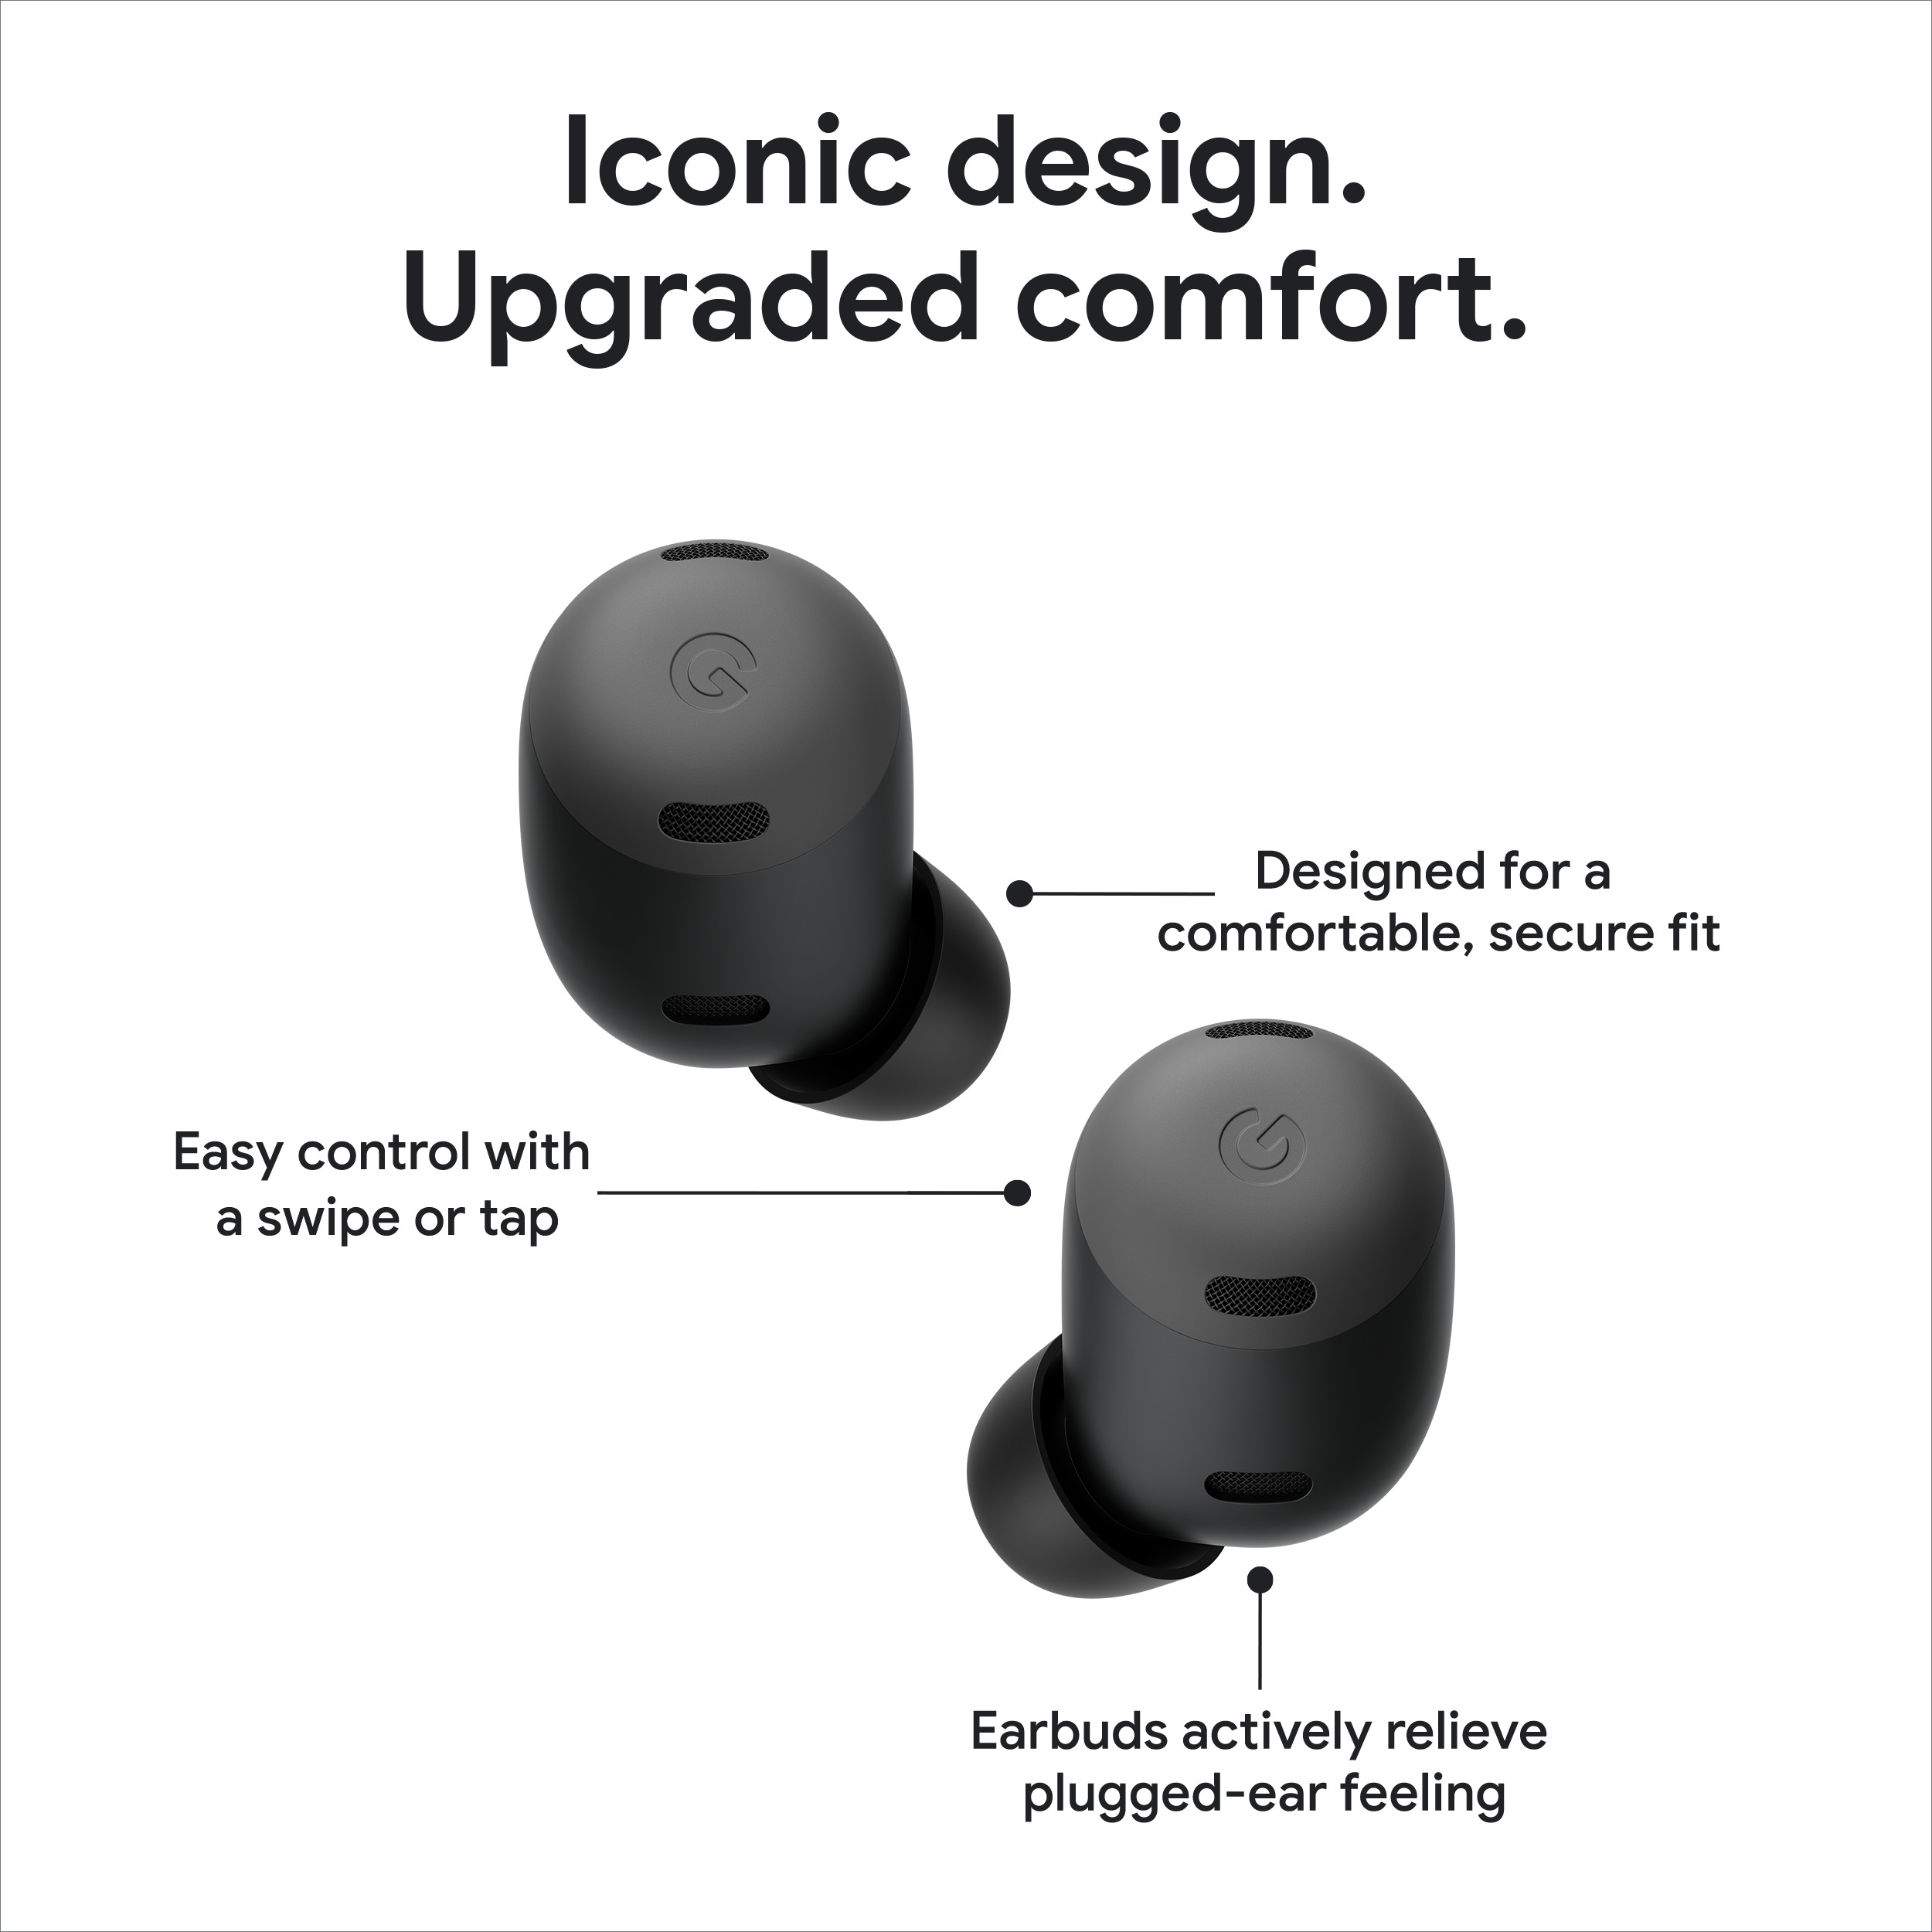 Google Pixel Buds Pro - Wireless Earbuds with Active Noise Cancellation - Bluetooth Earbuds - Charcoal - image 5 of 8